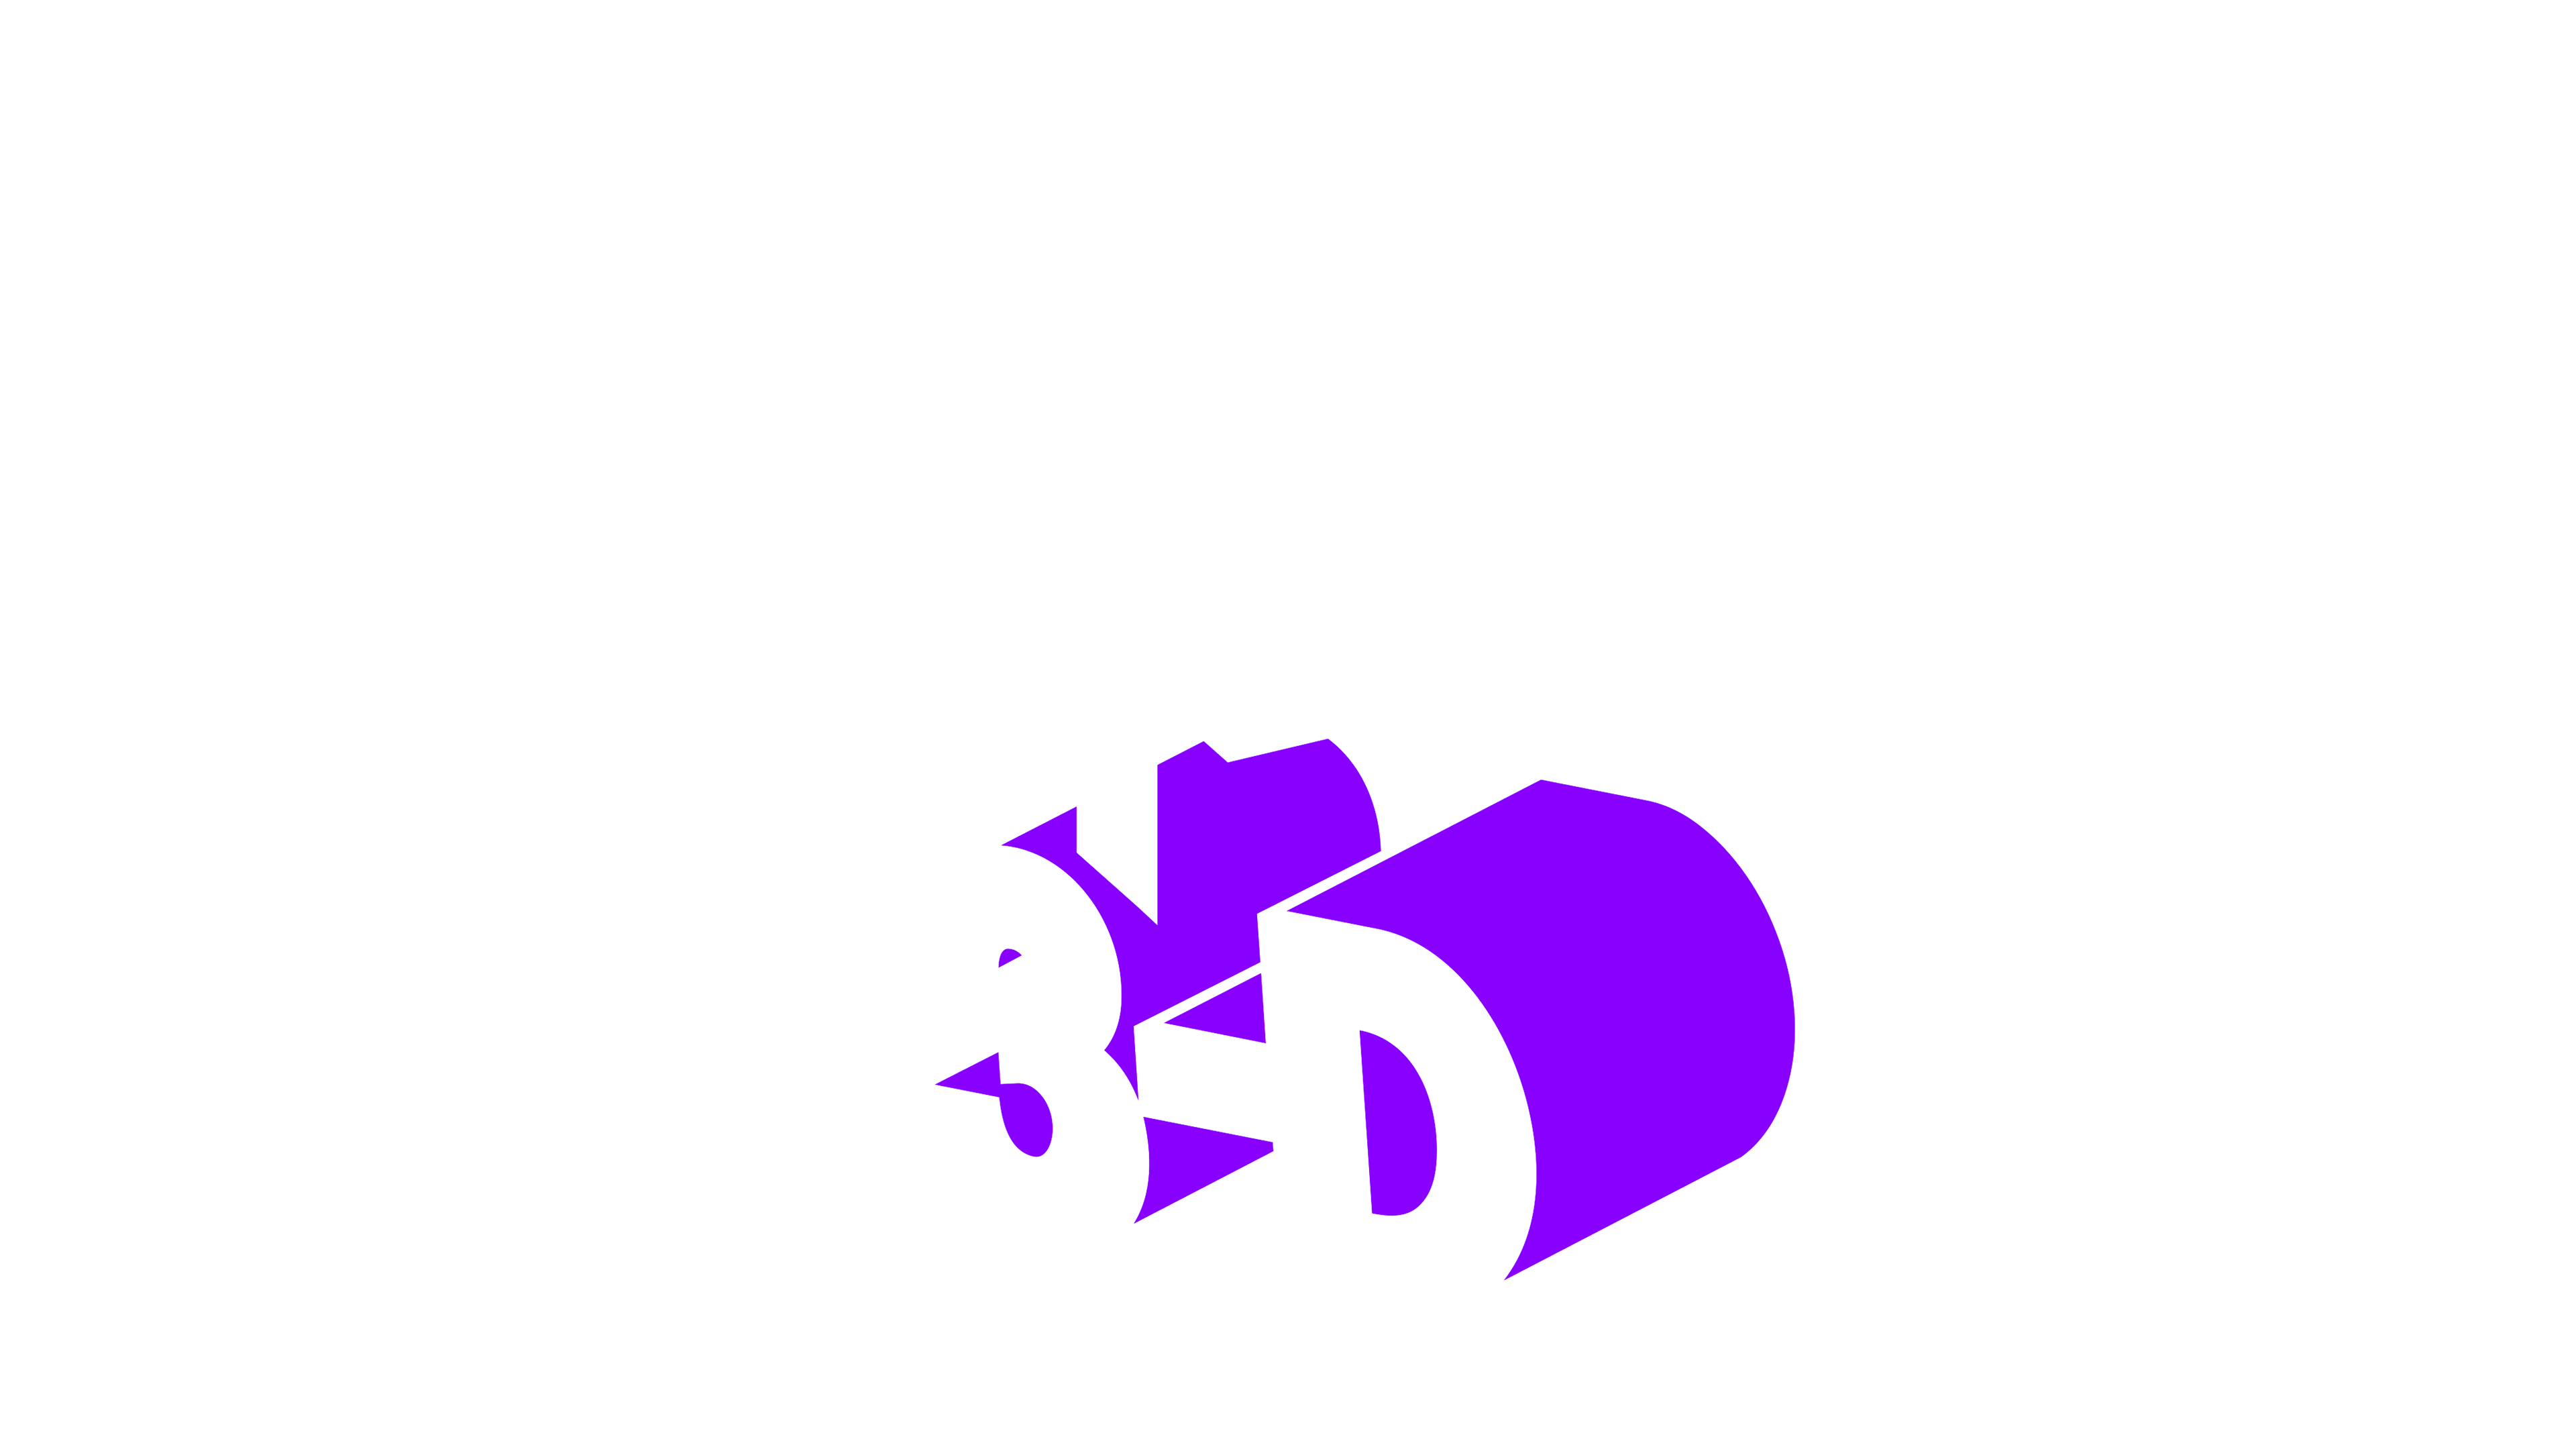 Cathedral 3-D